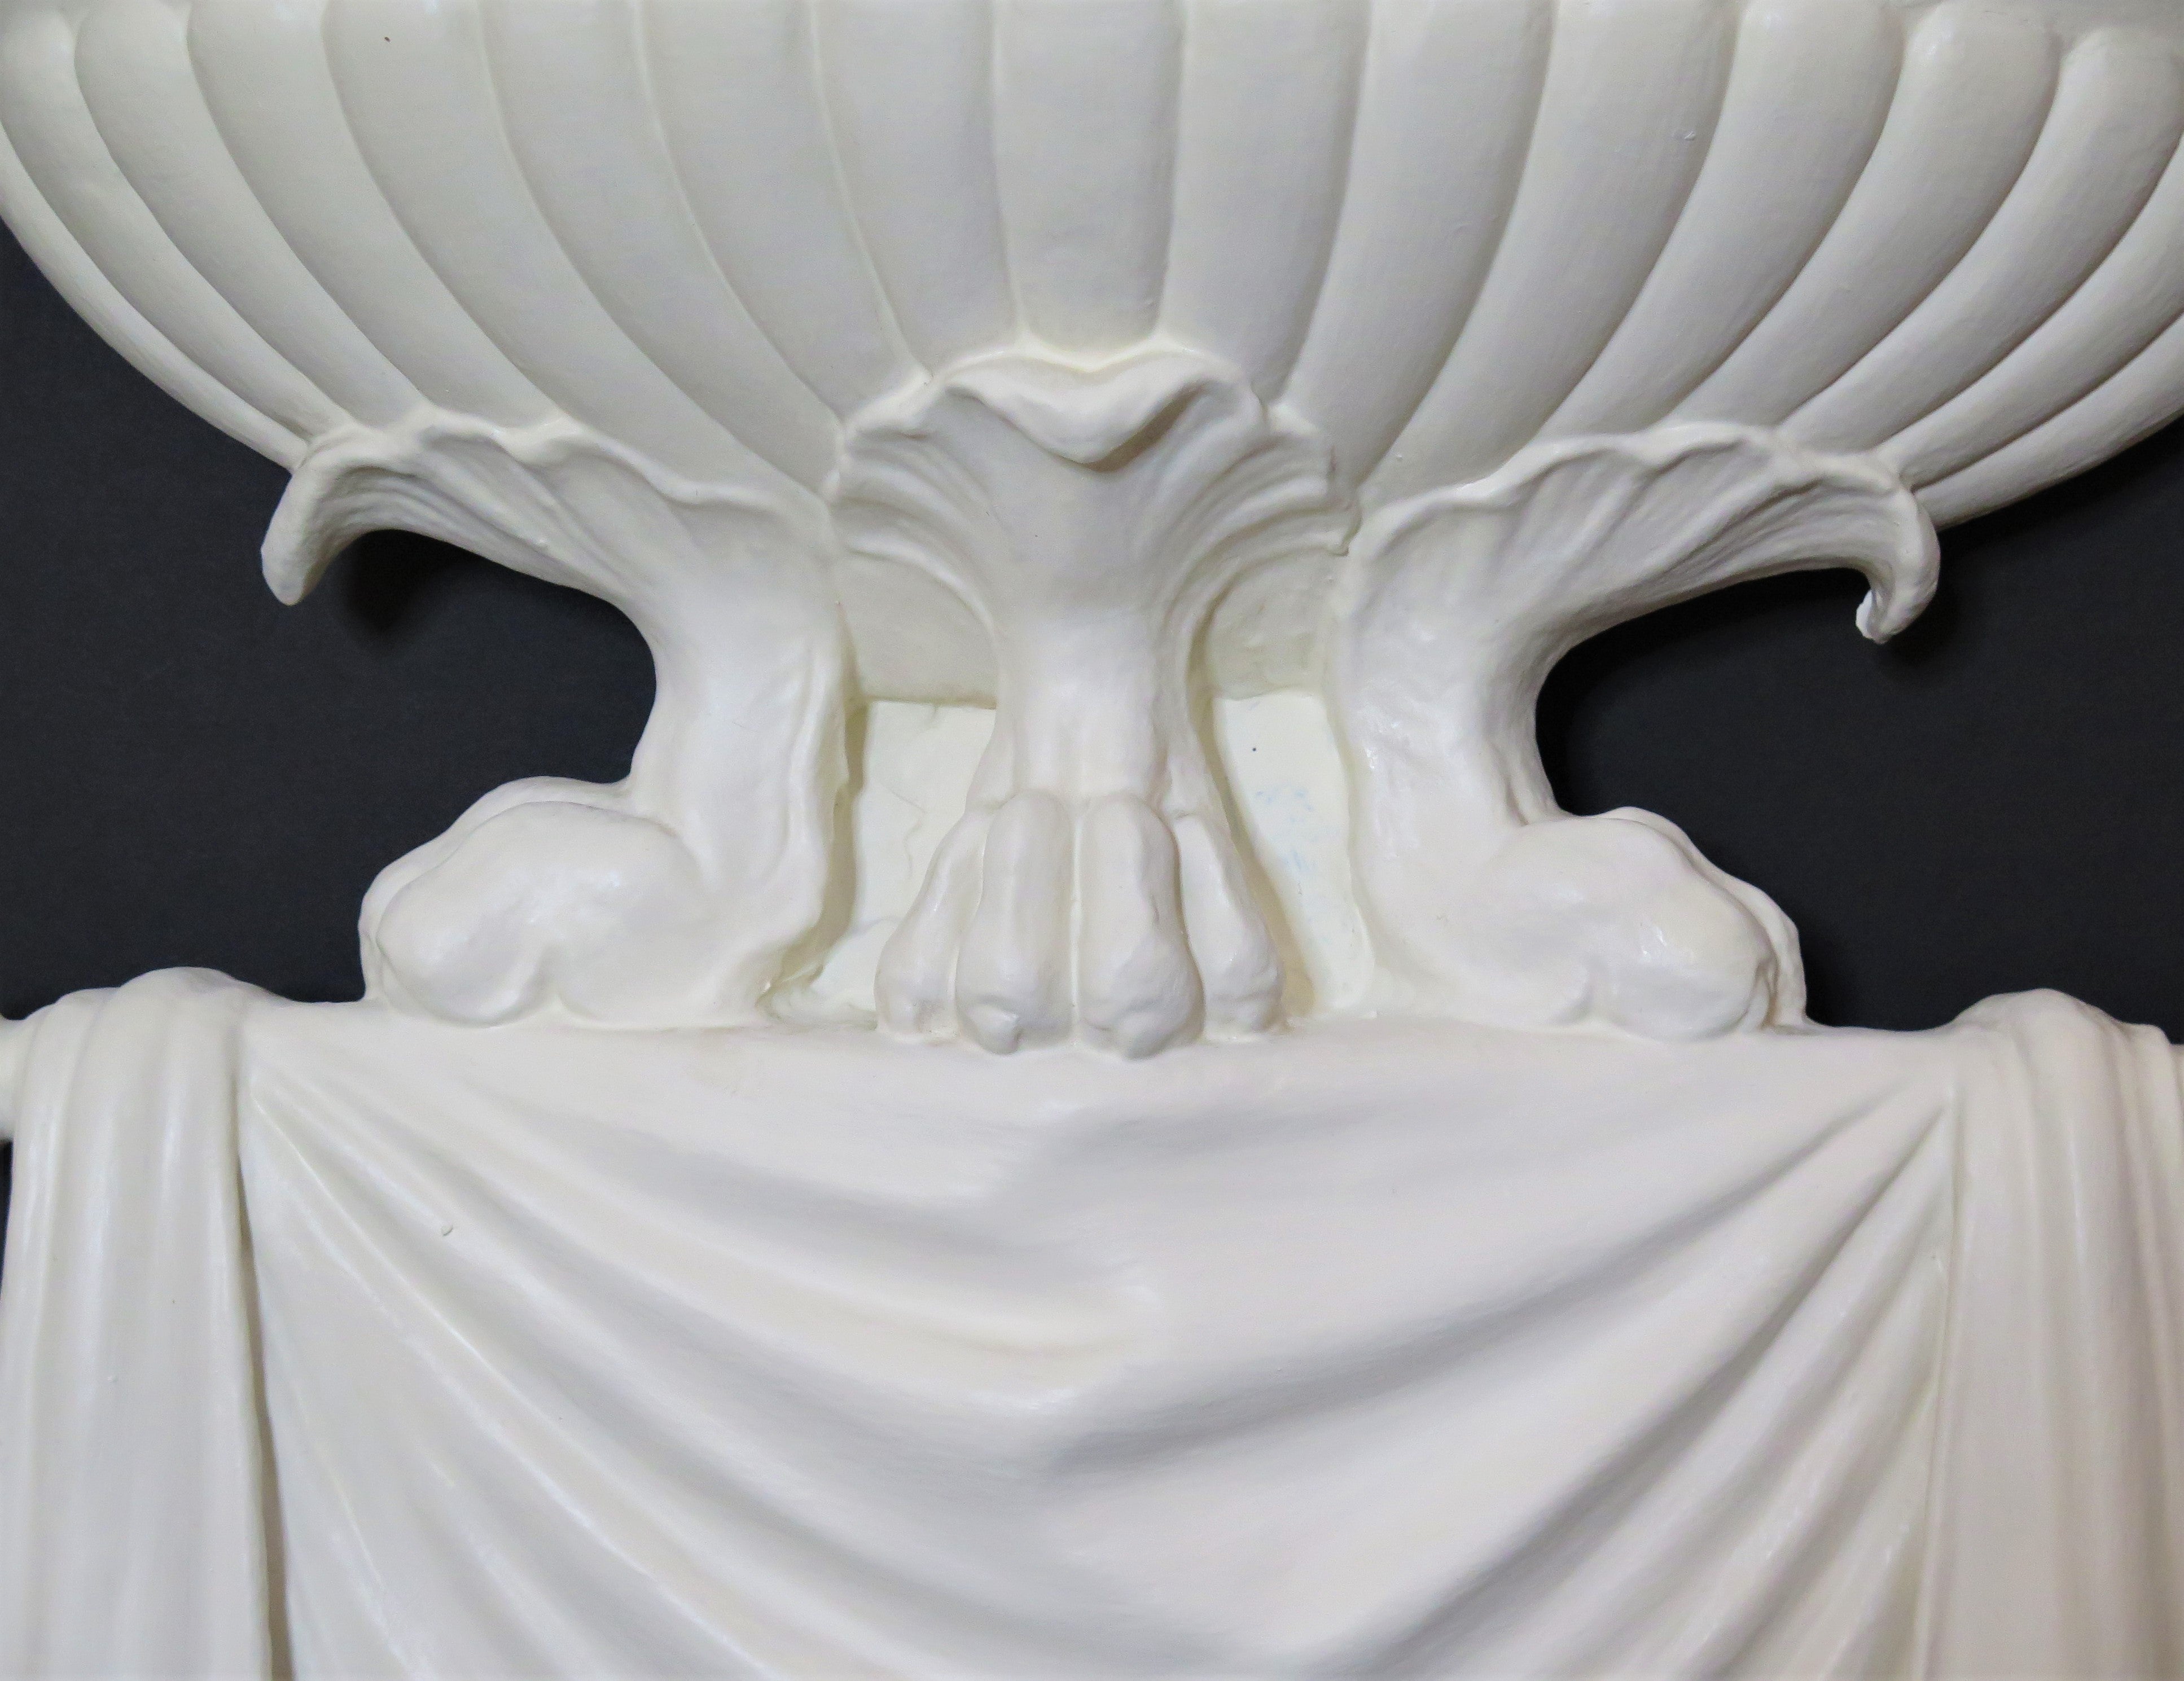 Plaster and Horsehair Sconces in the Manner of Dorothy Draper